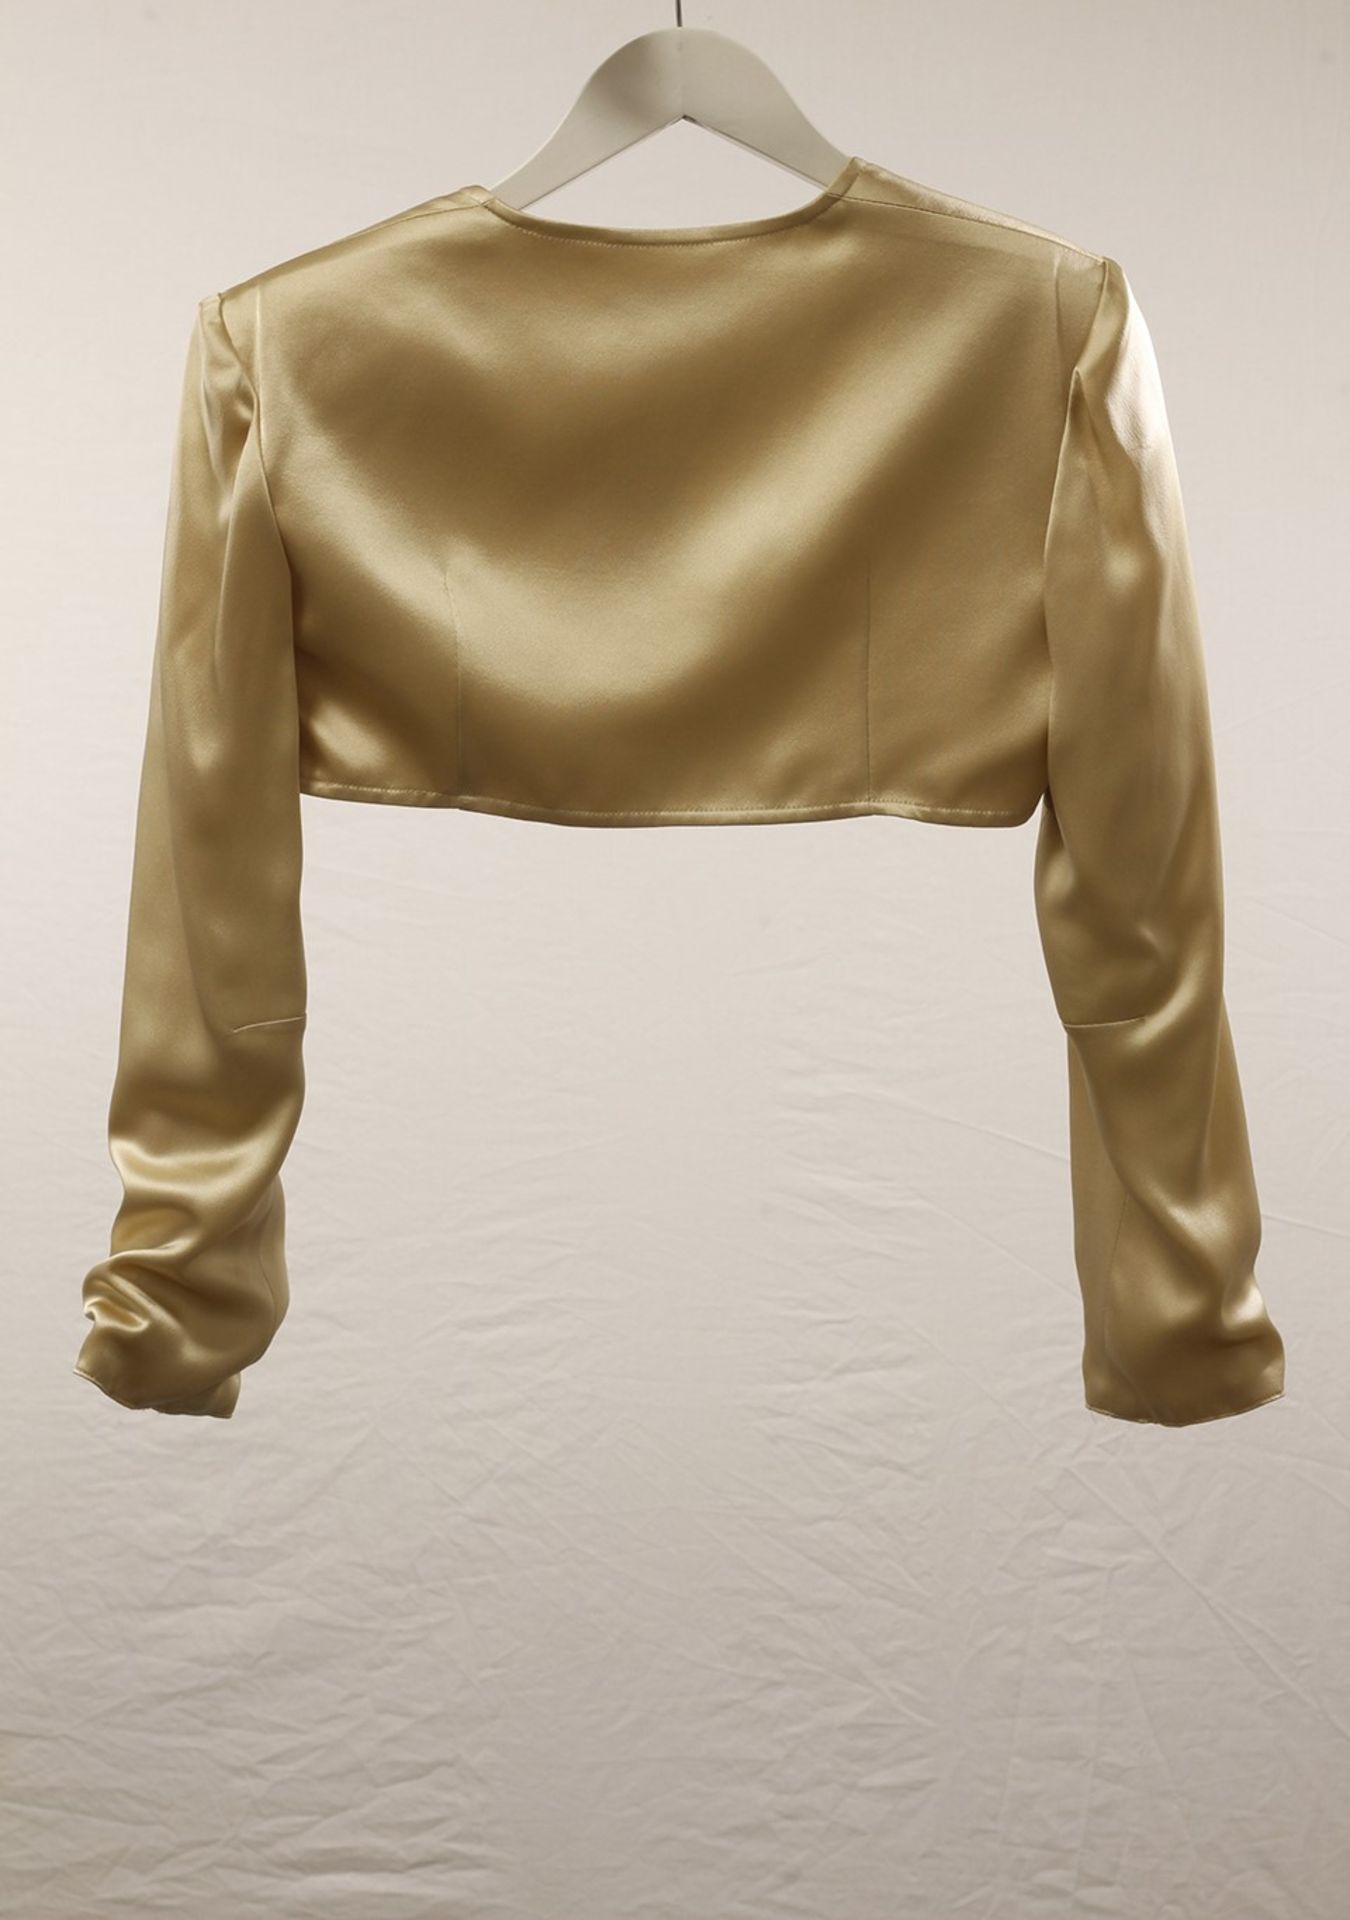 1 x Anne Belin Champagne Bolero - Size: 16 - Material: 50% Viscose, 50% Acetate - From a High End - Image 2 of 6